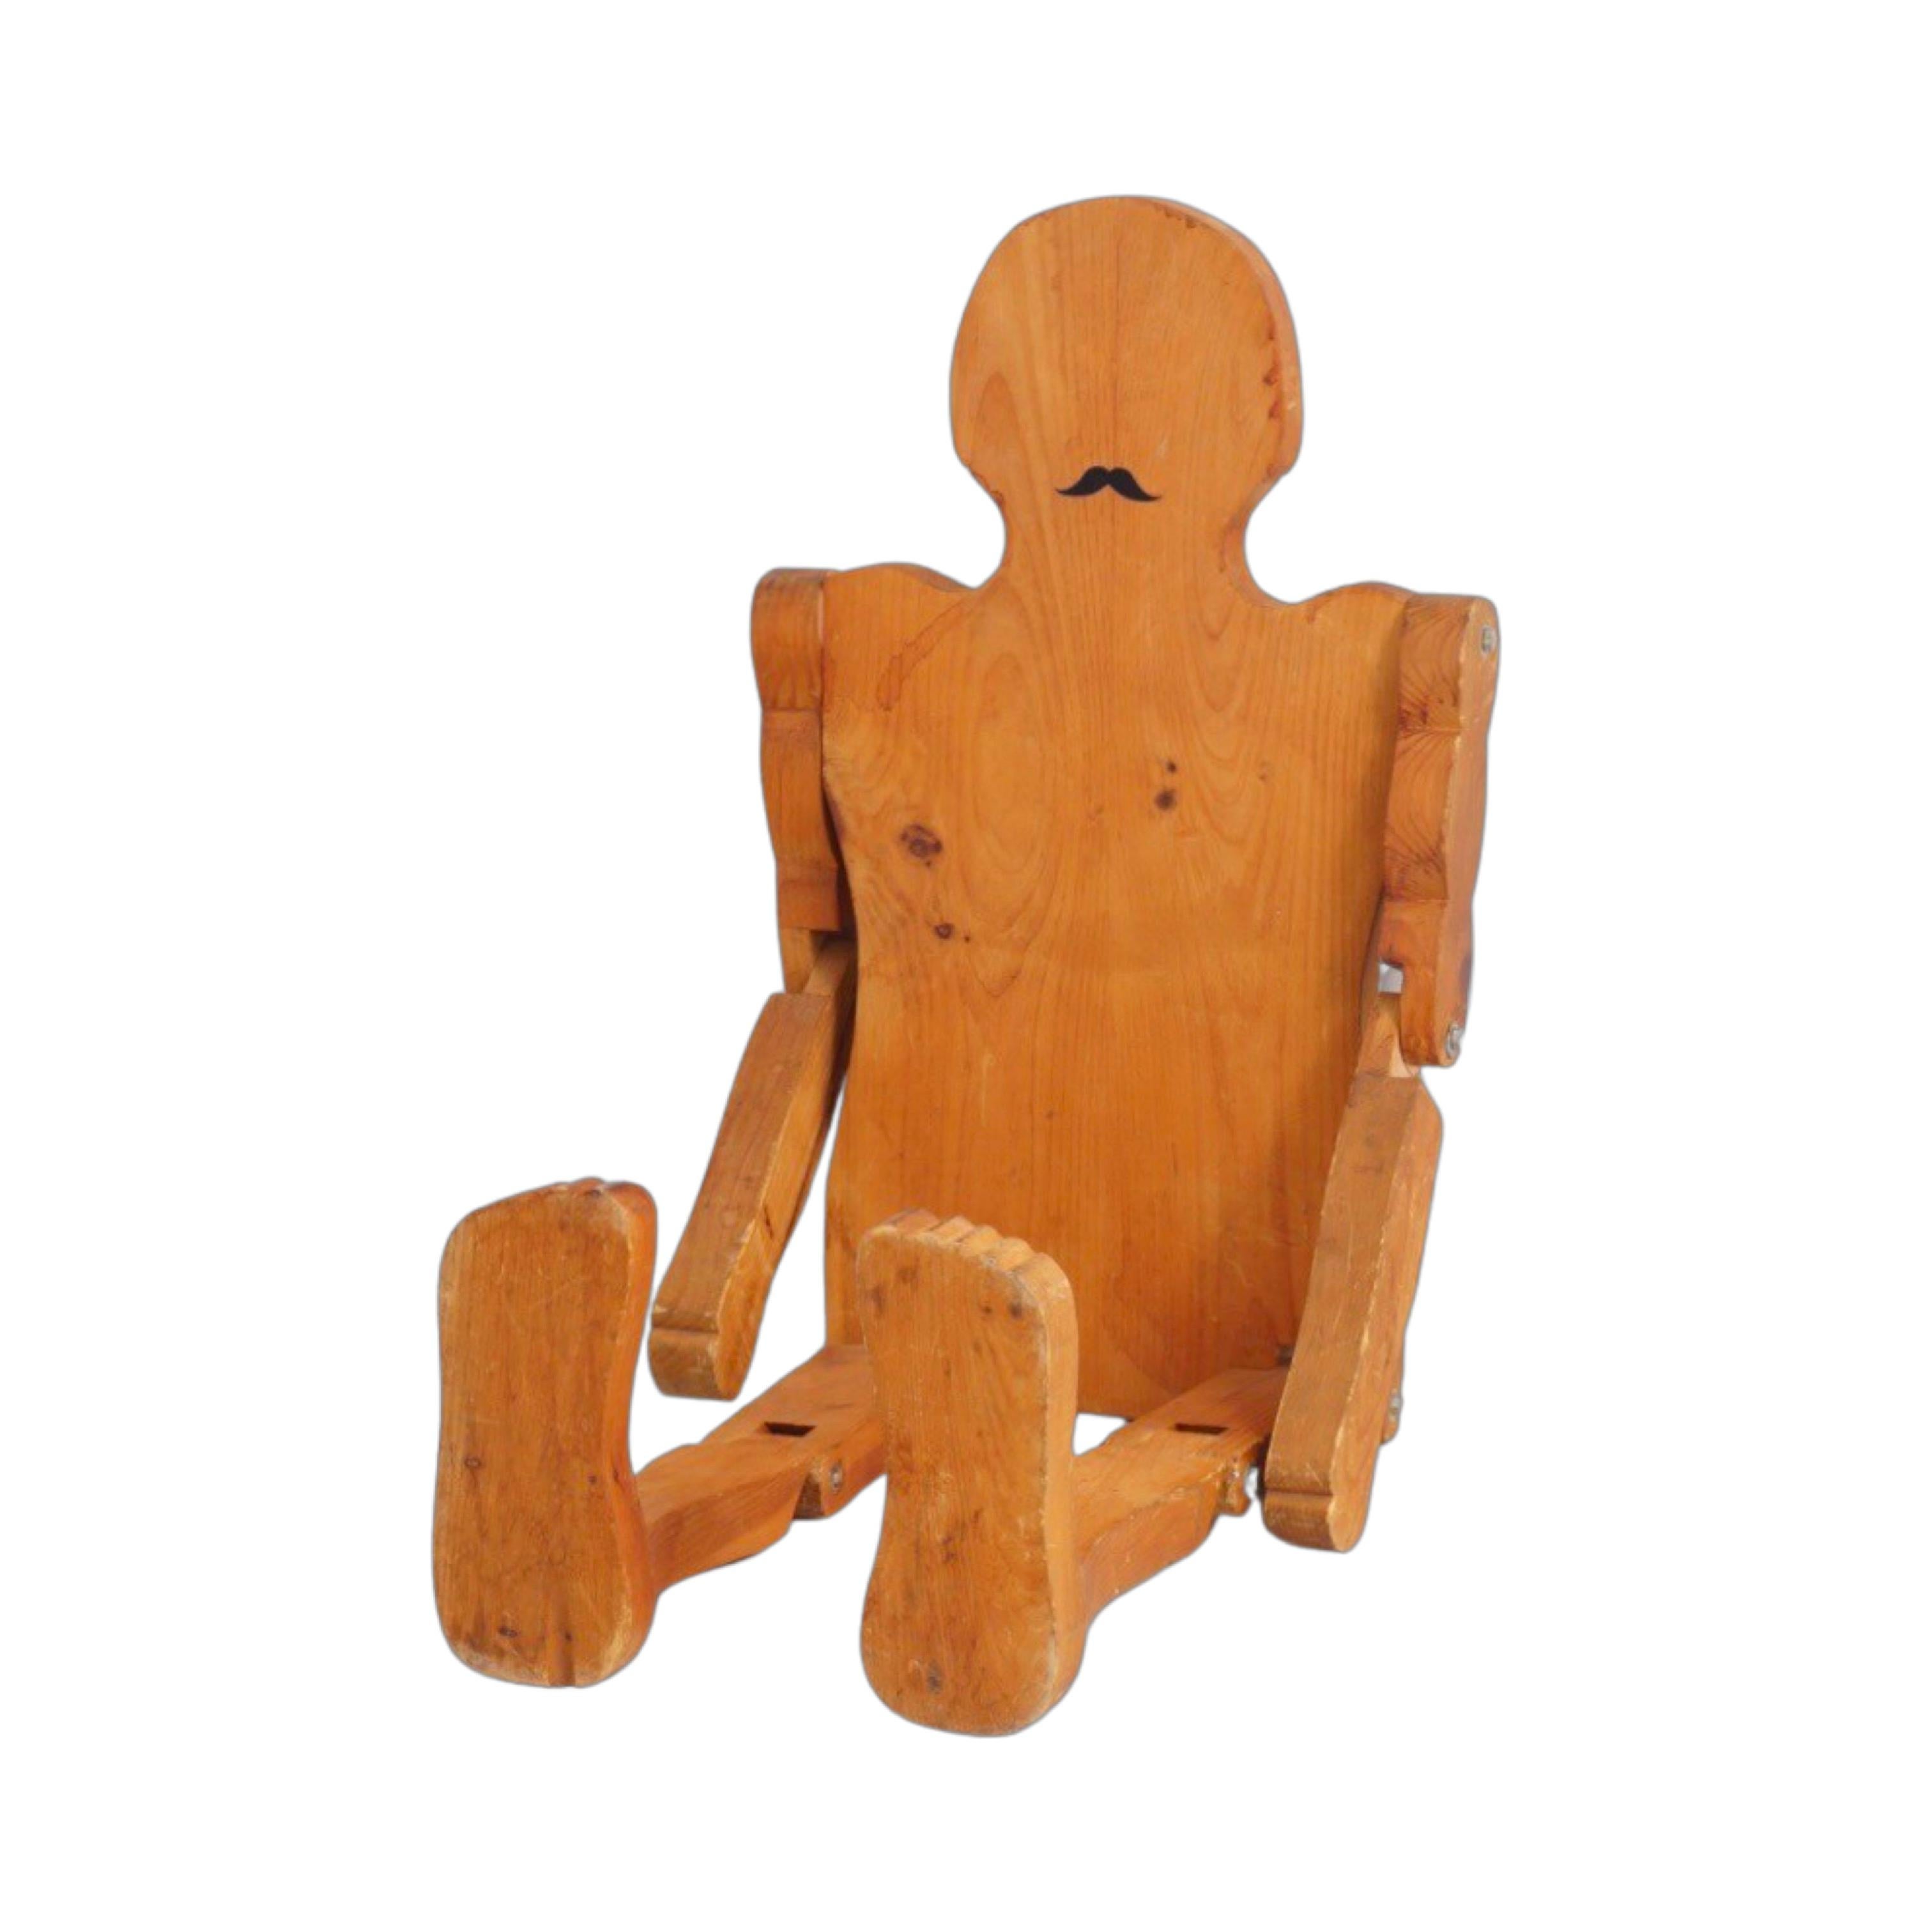 Wood Articulating Figural Table, 1980s For Sale 4